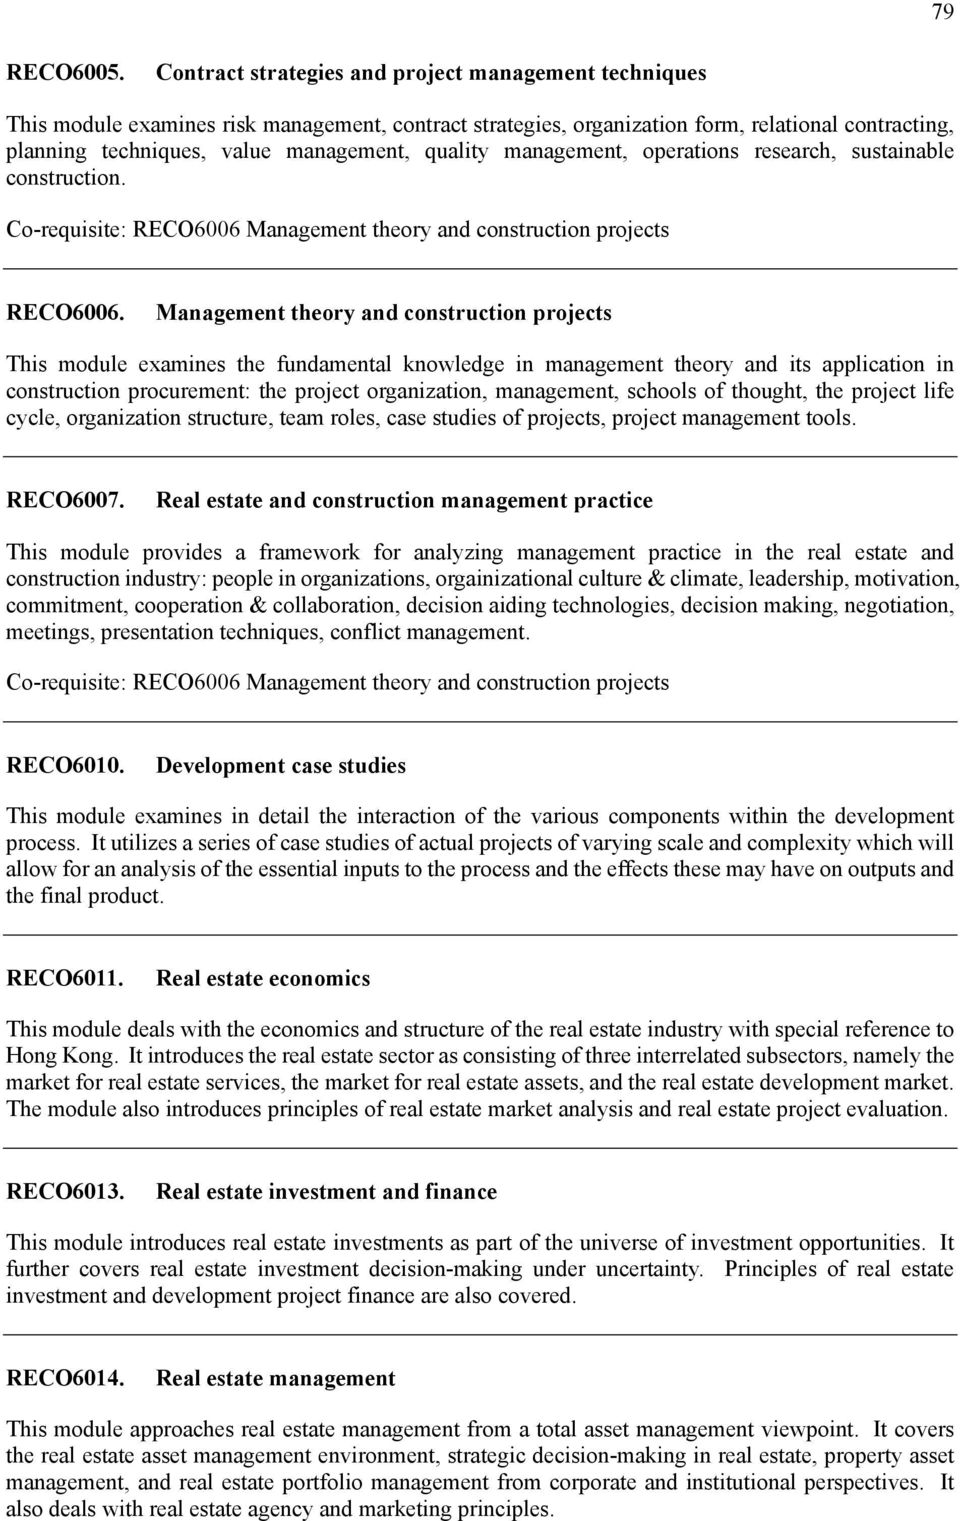 quality management, operations research, sustainable construction. Co-requisite: RECO6006 Management theory and construction projects RECO6006.